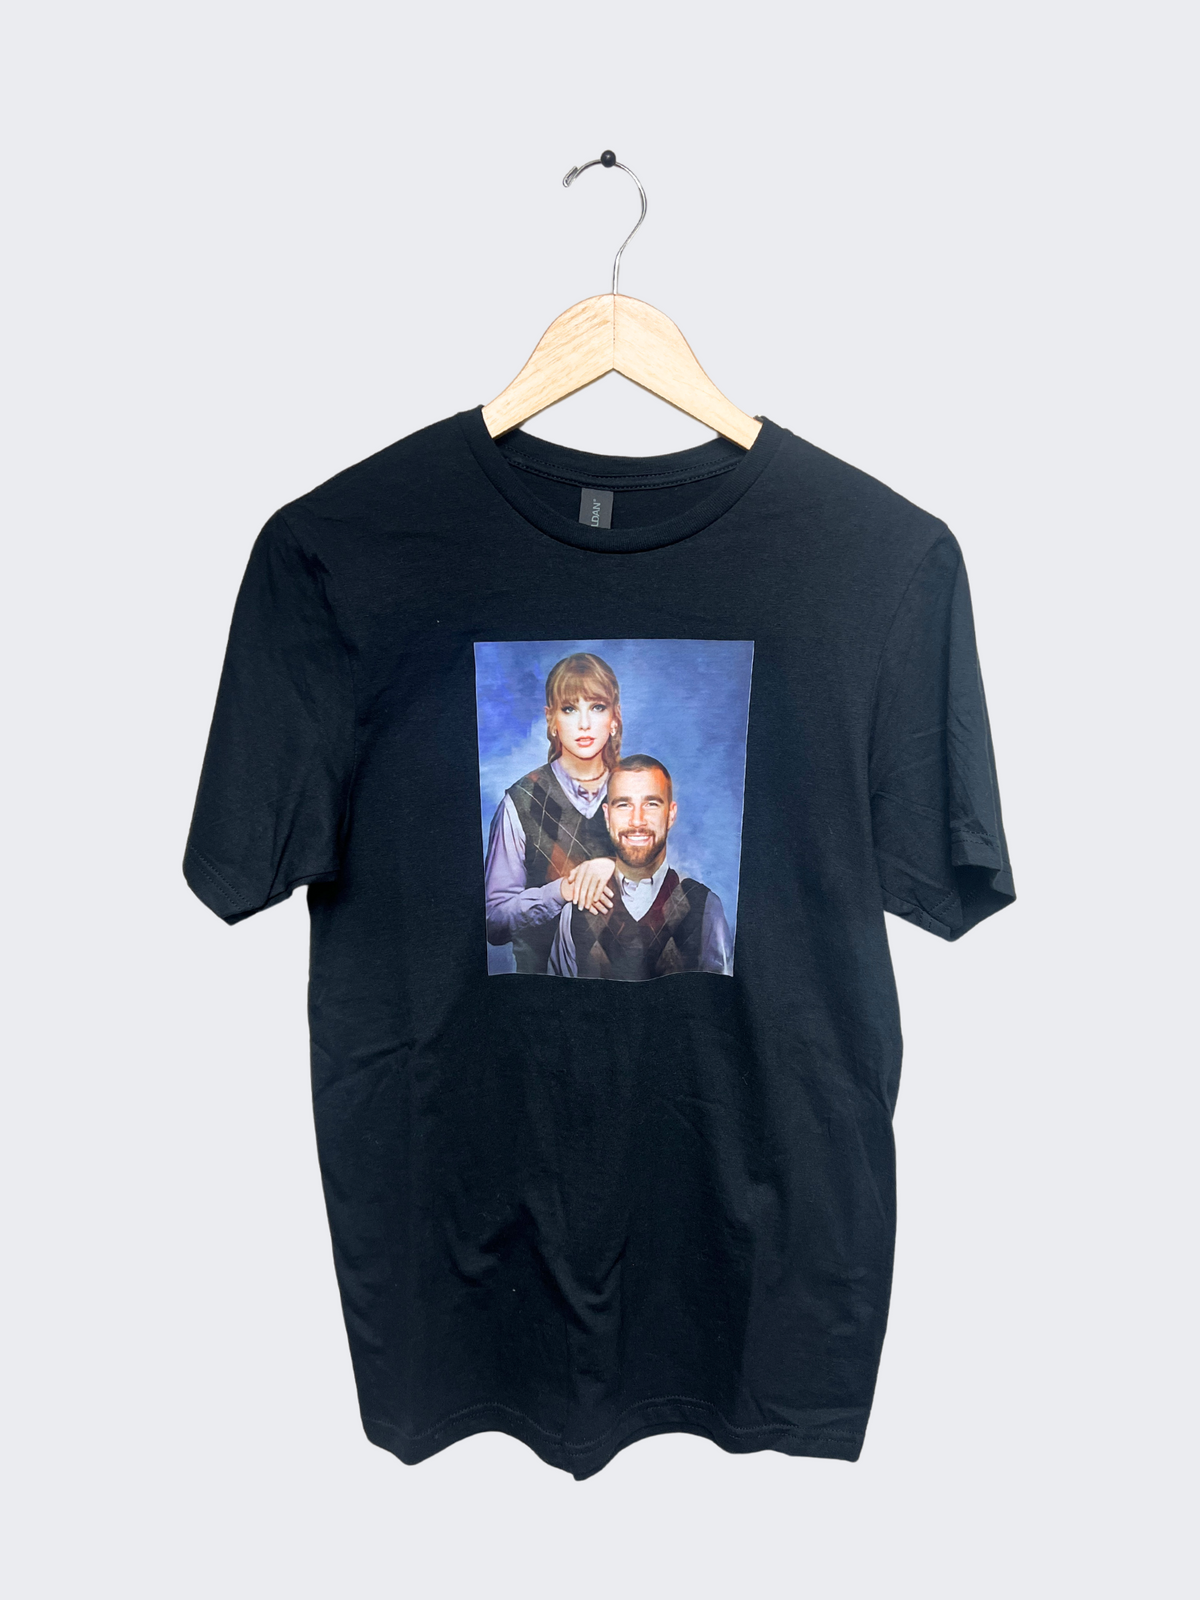 taylor swift and travis kelce graphic tee